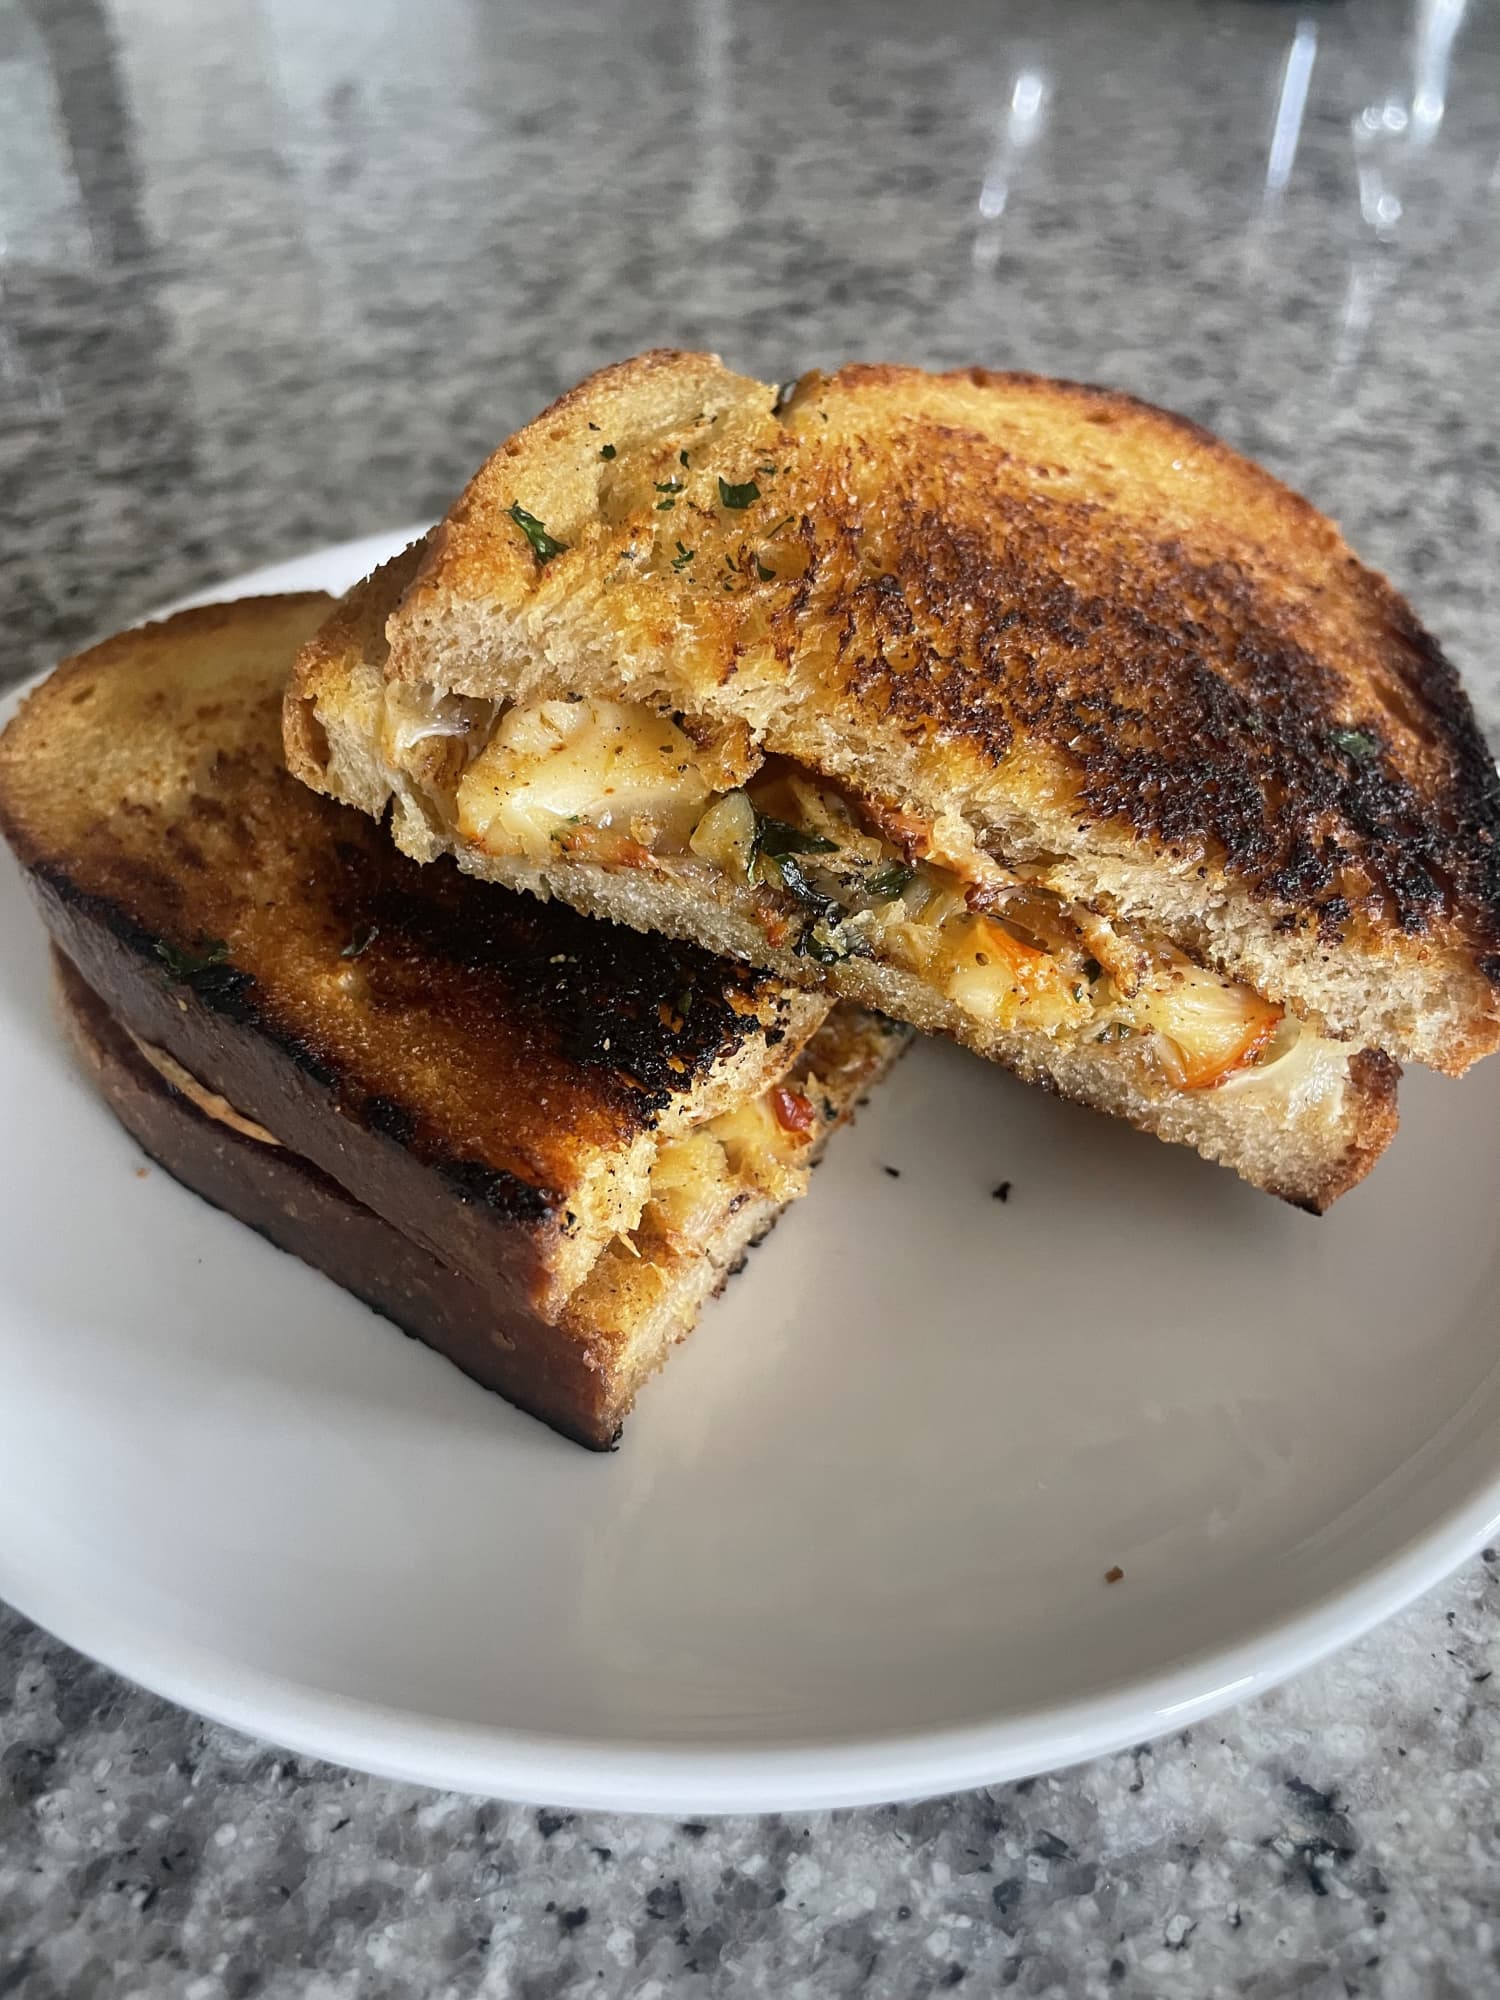 I Tried the Lobster Grilled Cheese That Everyone’s Obsessed With and It Definitely Lived Up to the Hype